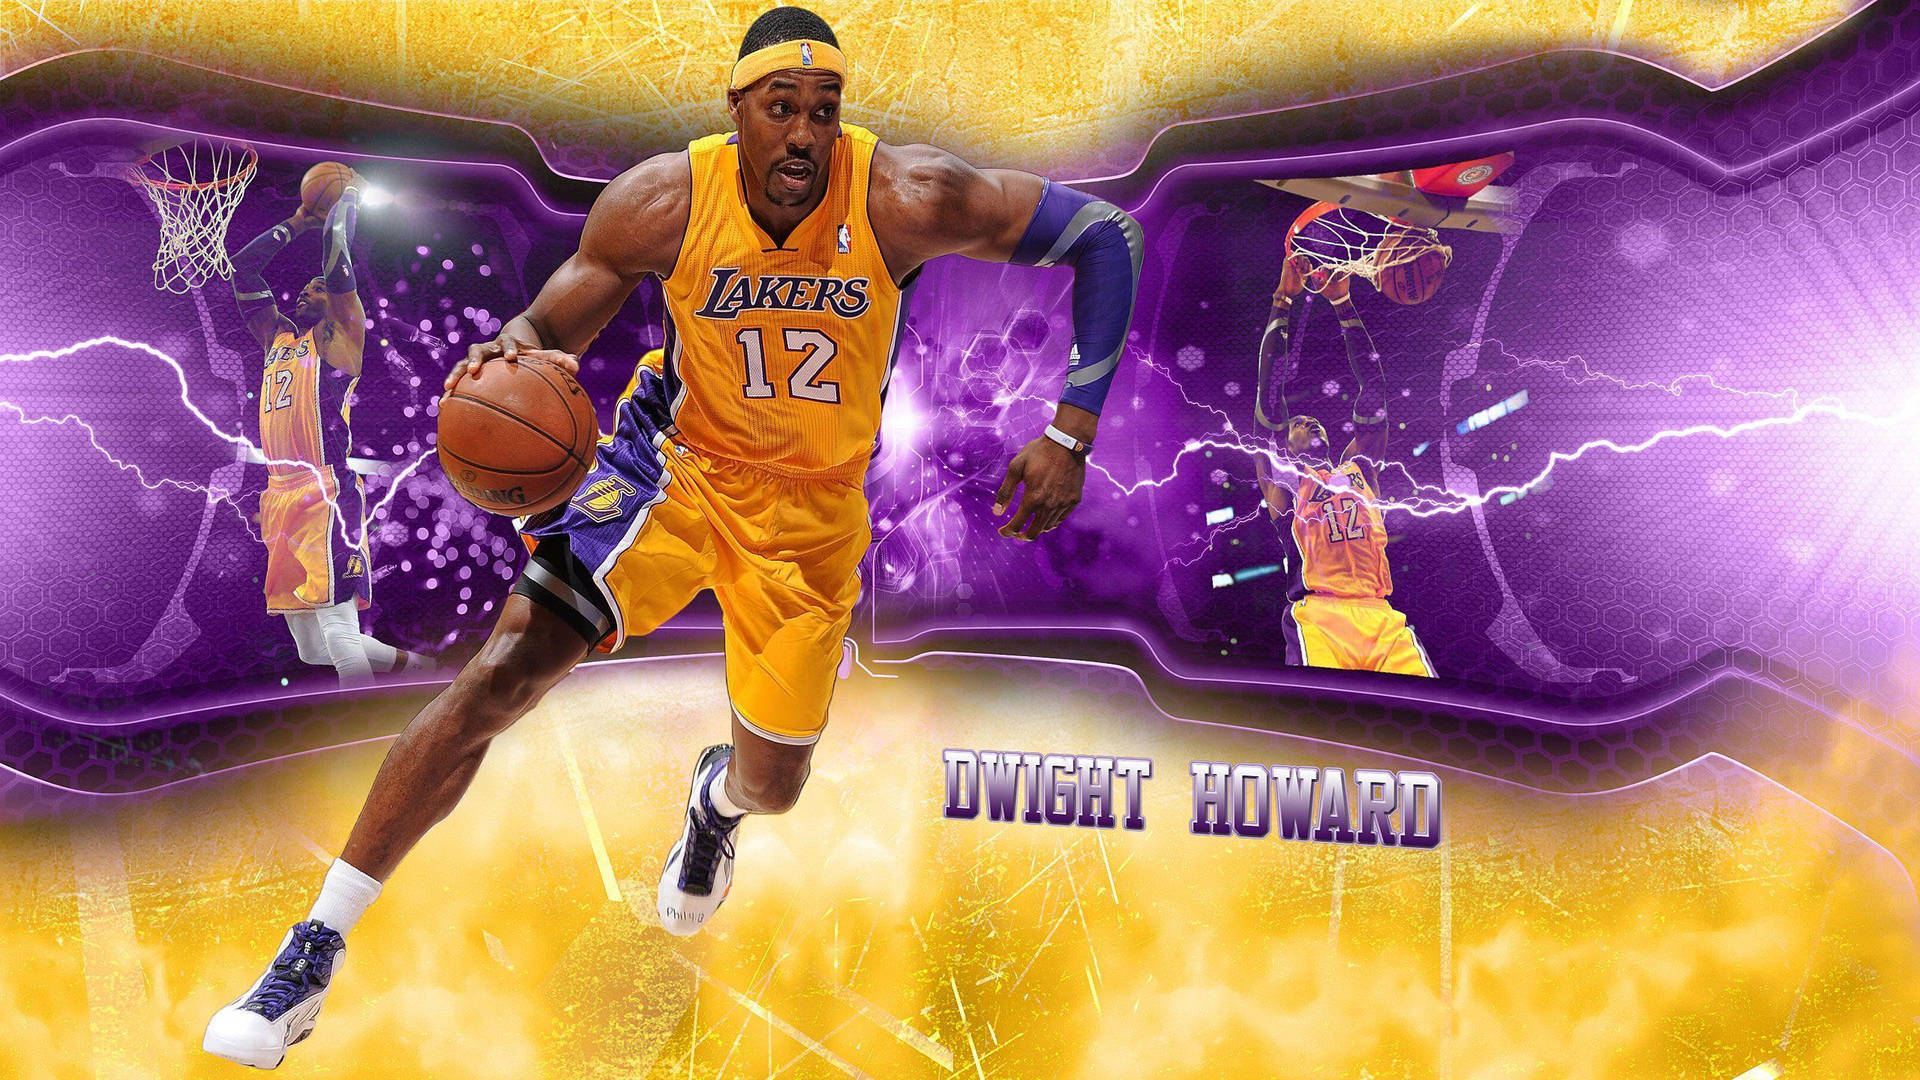 Dwighthoward, Los Angeles Lakers Center - Dwight Howard, Los Angeles Lakers Center. Wallpaper